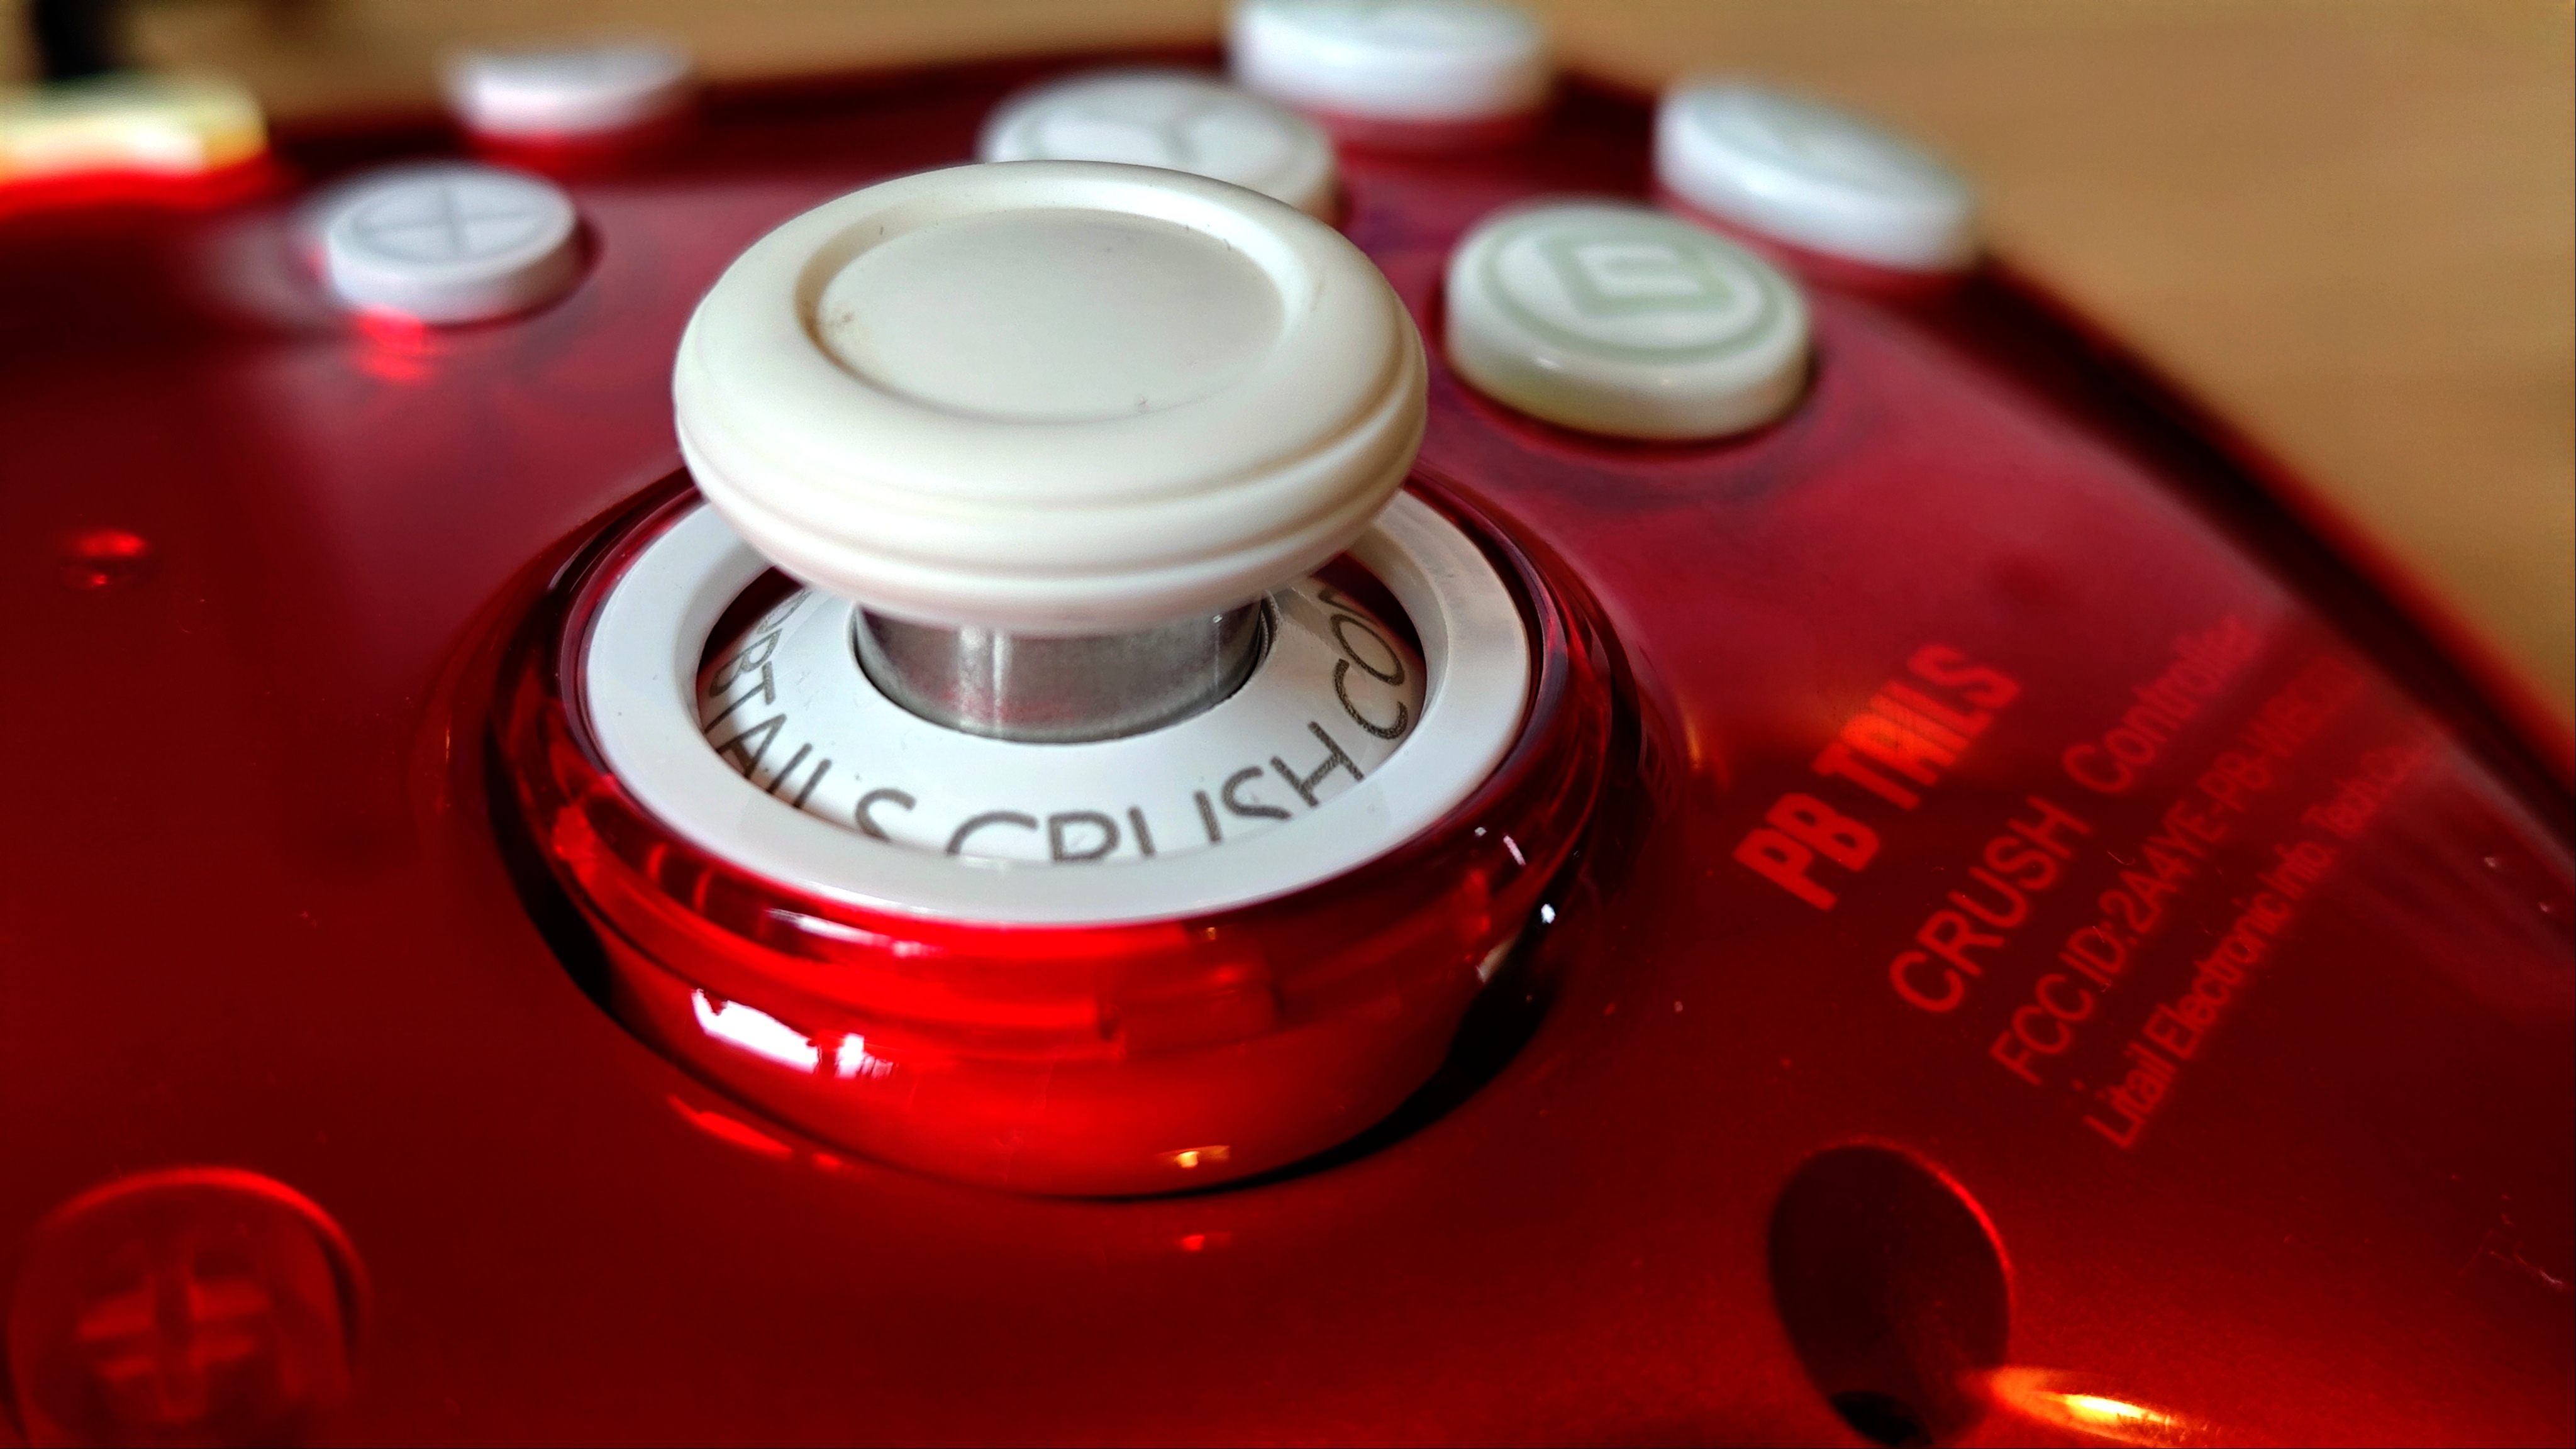 A Ruby red PB Tails Crush gaming controller sitting on a wooden desk